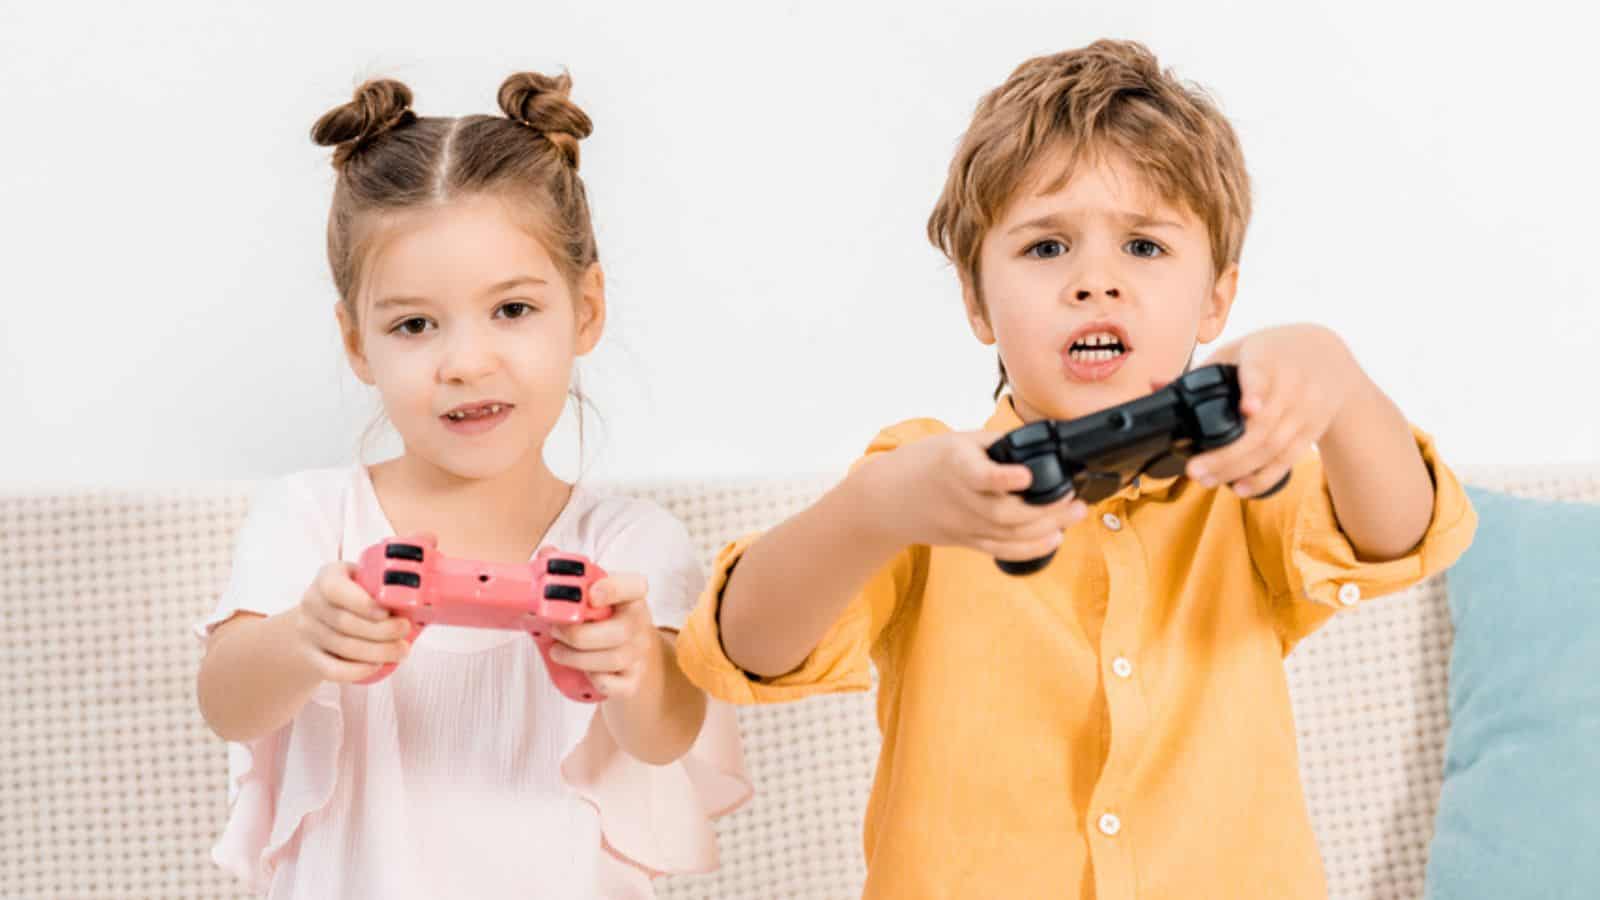 Adorable kids playing with joysticks and looking at camera